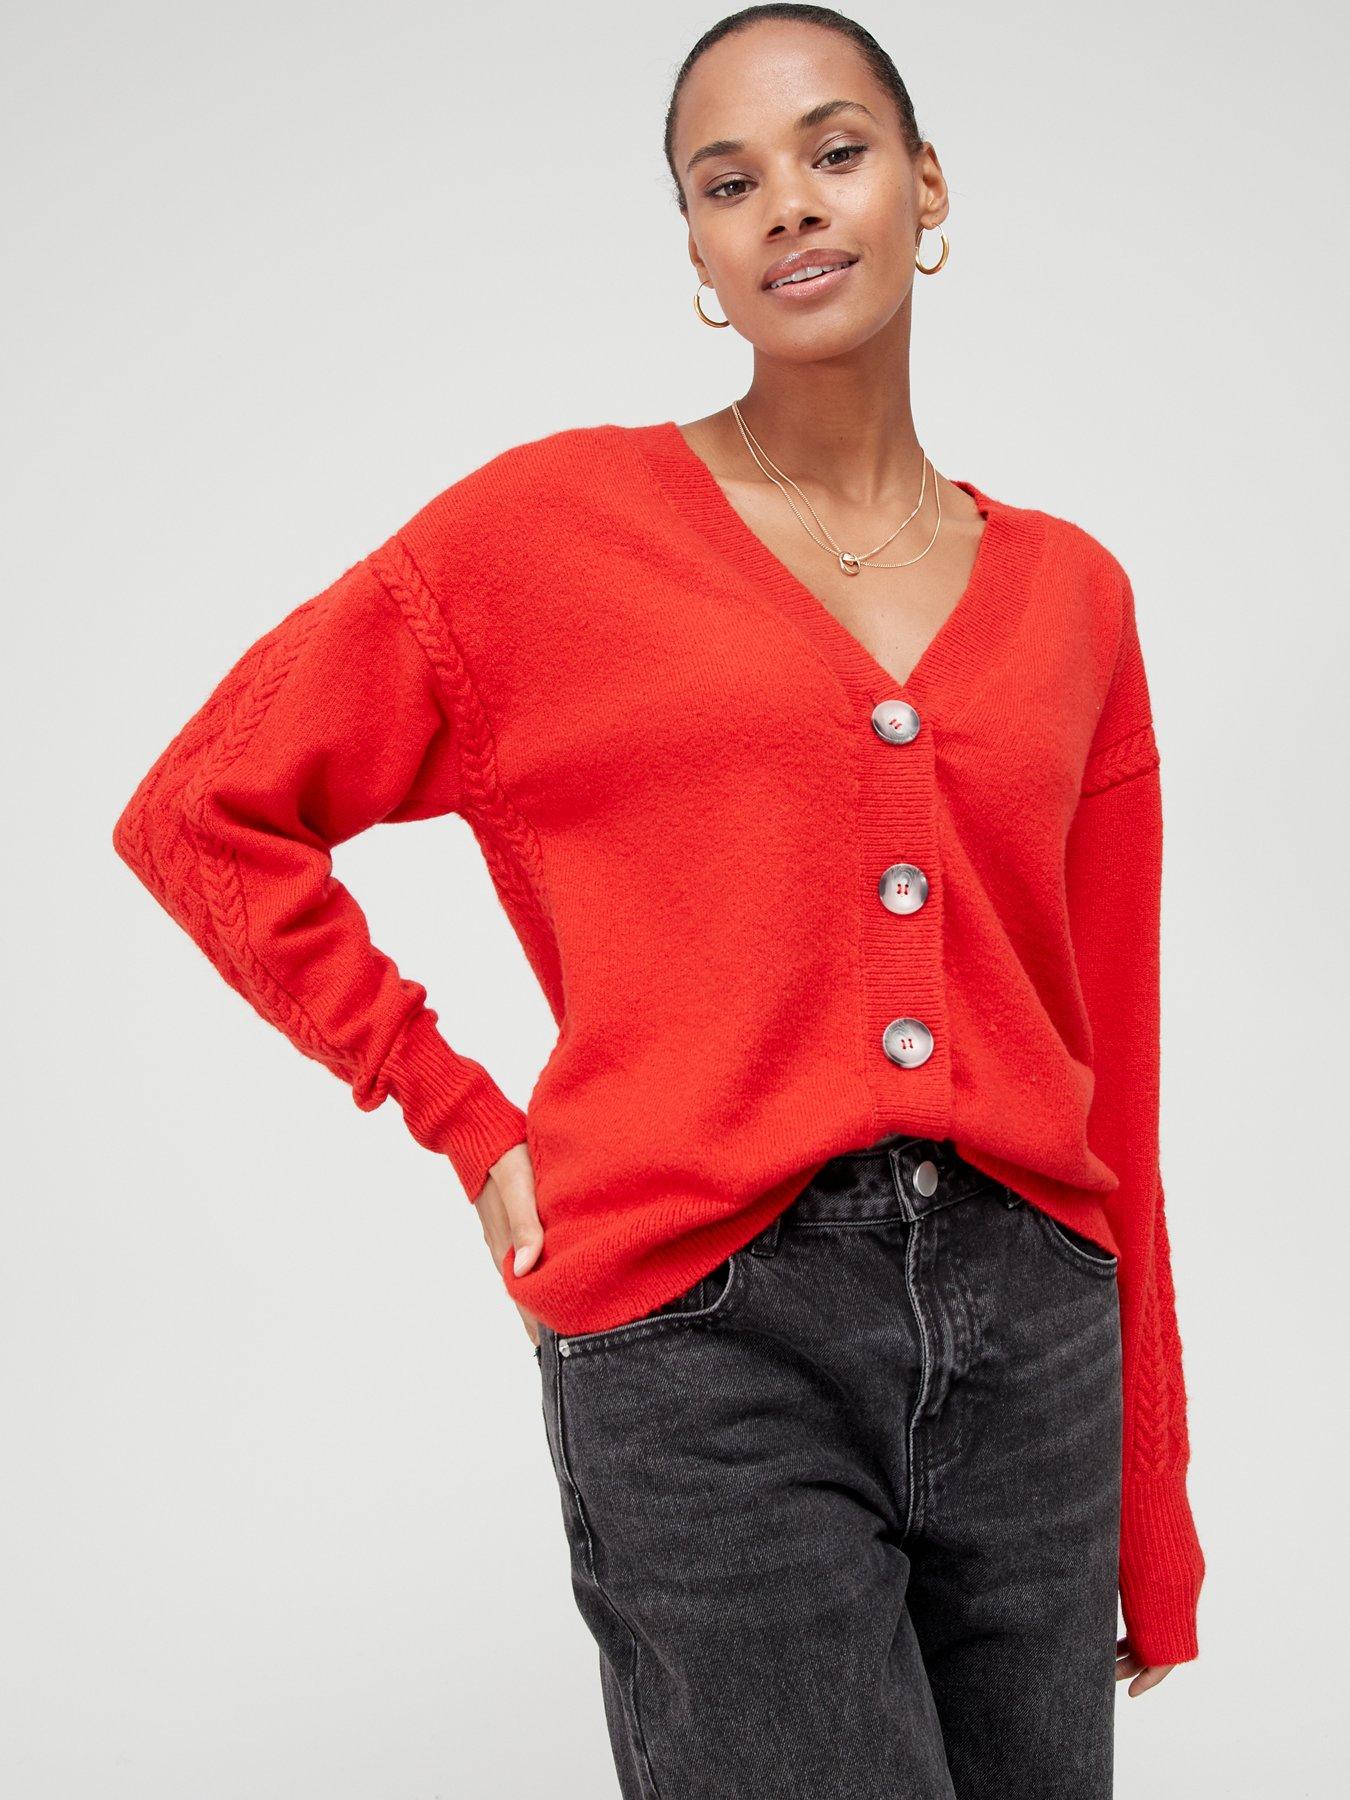 V by Very Knitted Cable Sleeve Cardigan - Red | very.co.uk